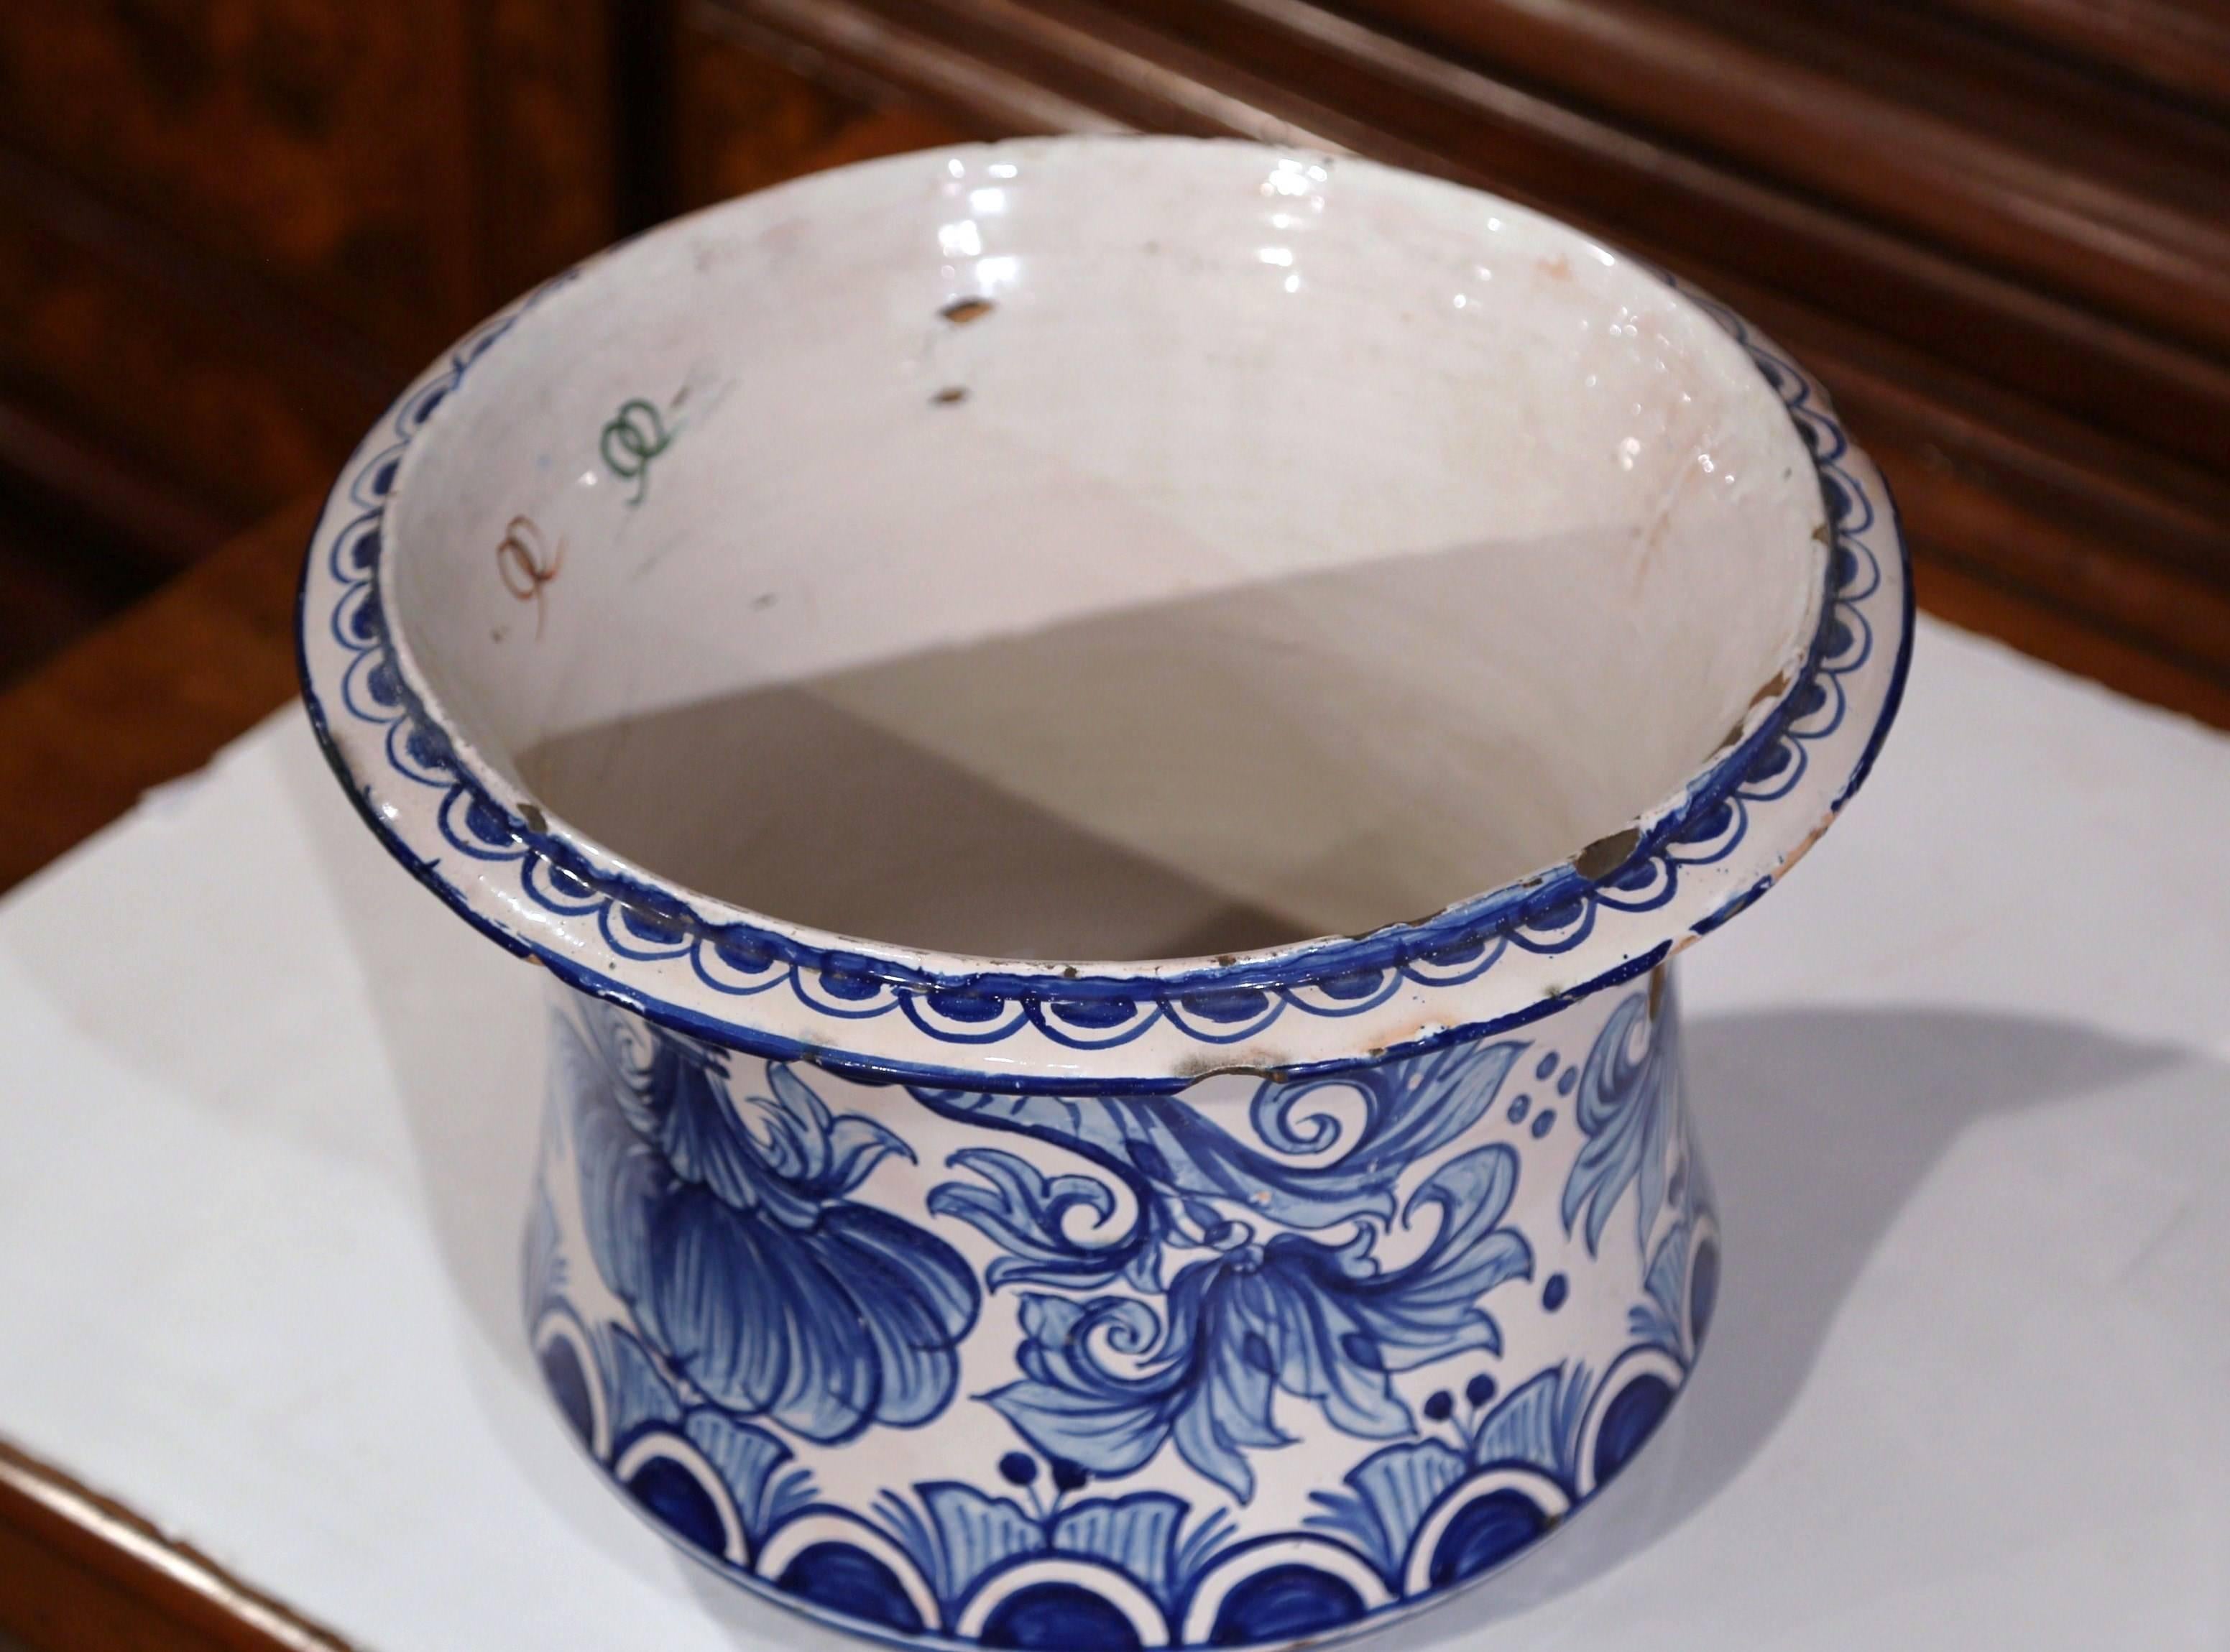 Faience Mid-19th Century French Hand-Painted Blue and White Cachepot Planter